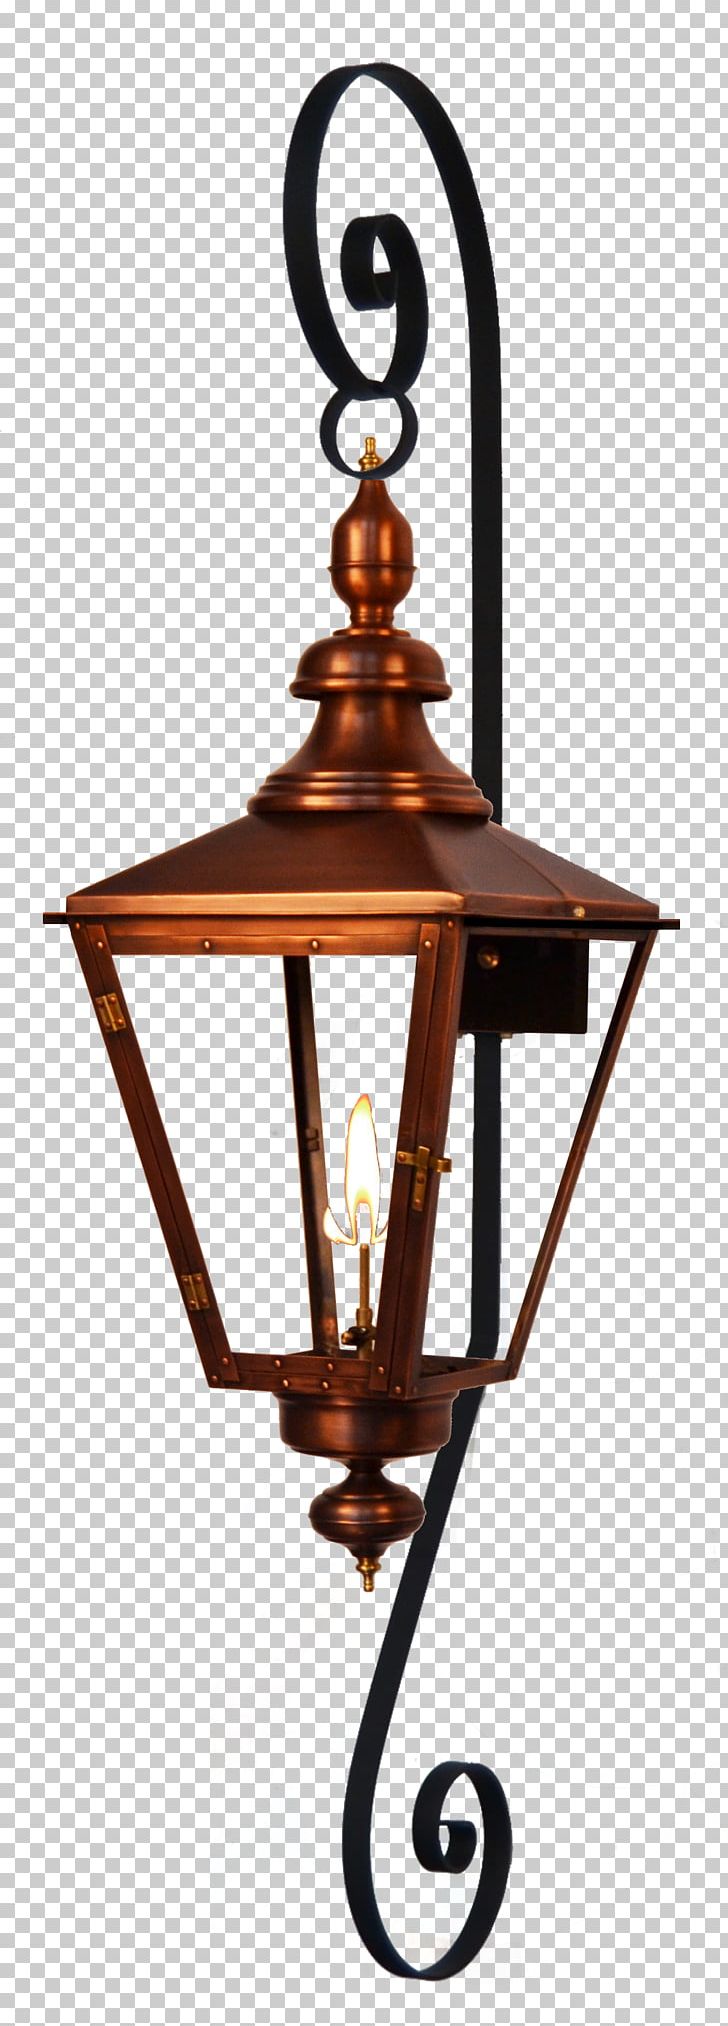 Gas Lighting Lantern Light Fixture PNG, Clipart, Candle Holder, Ceiling, Ceiling Fixture, Copper, Coppersmith Free PNG Download